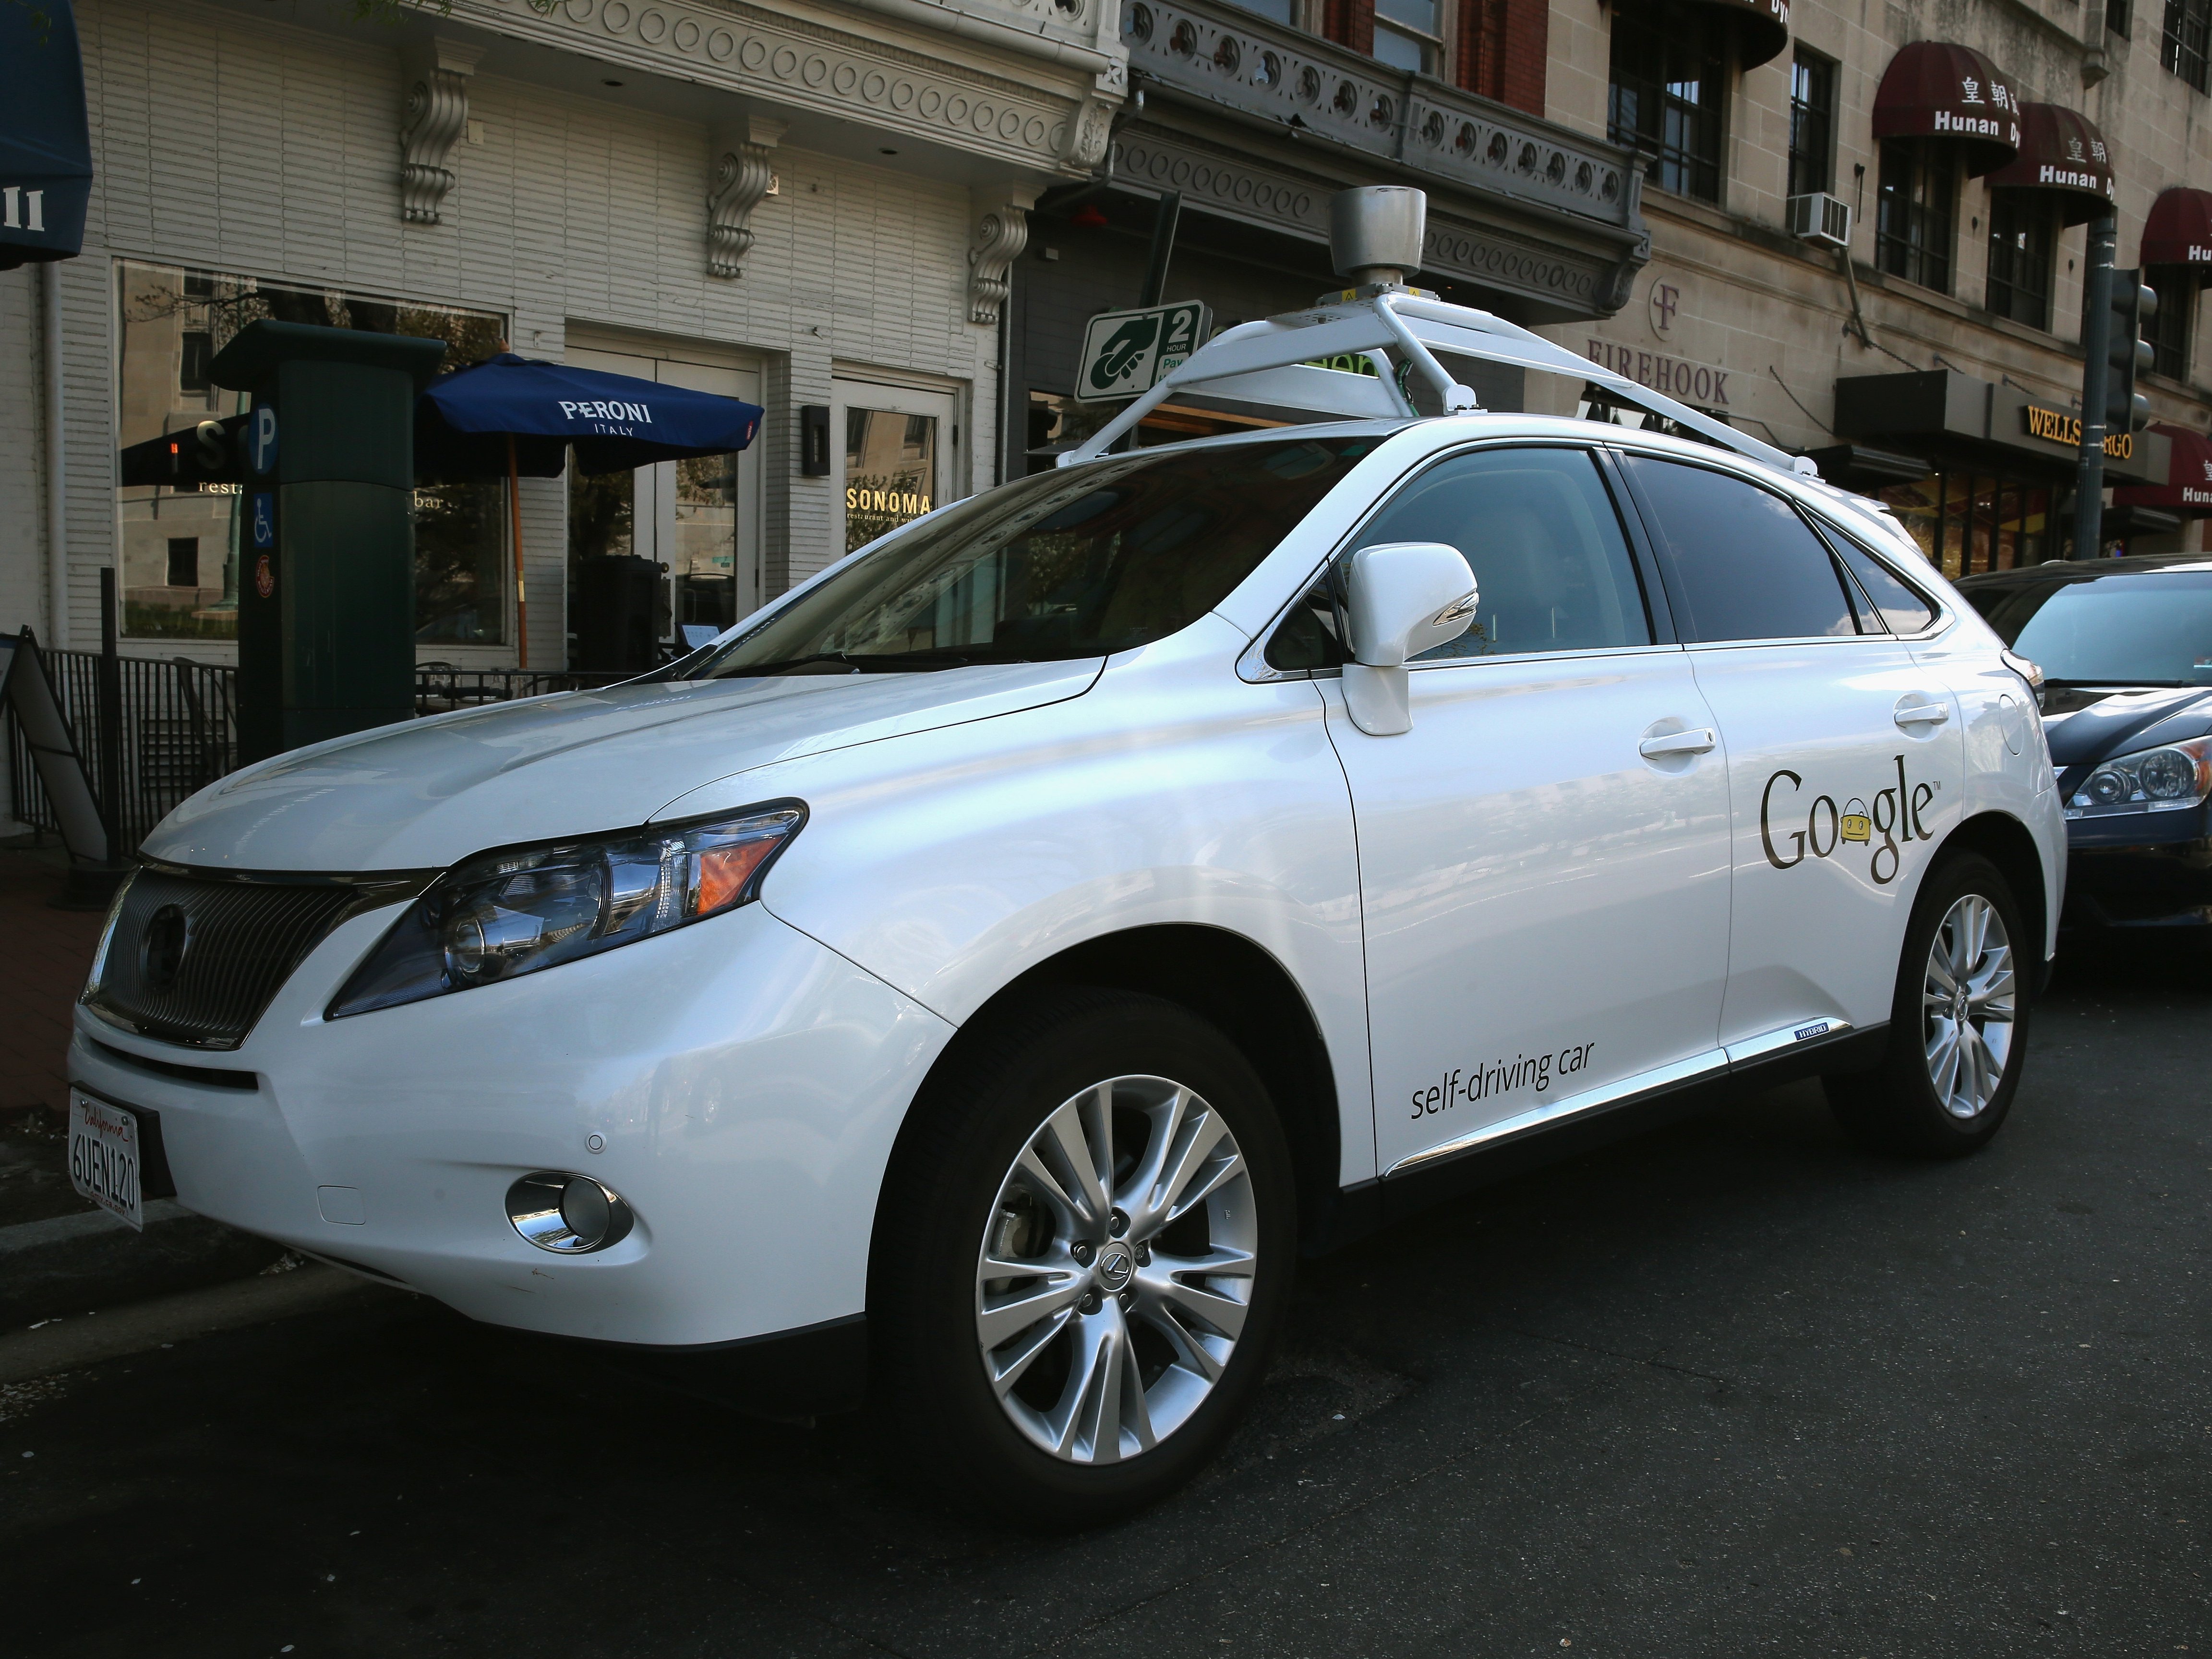 Google's self-driving car got in the first accident that was truly its fault, but it was going only 2 miles an hour